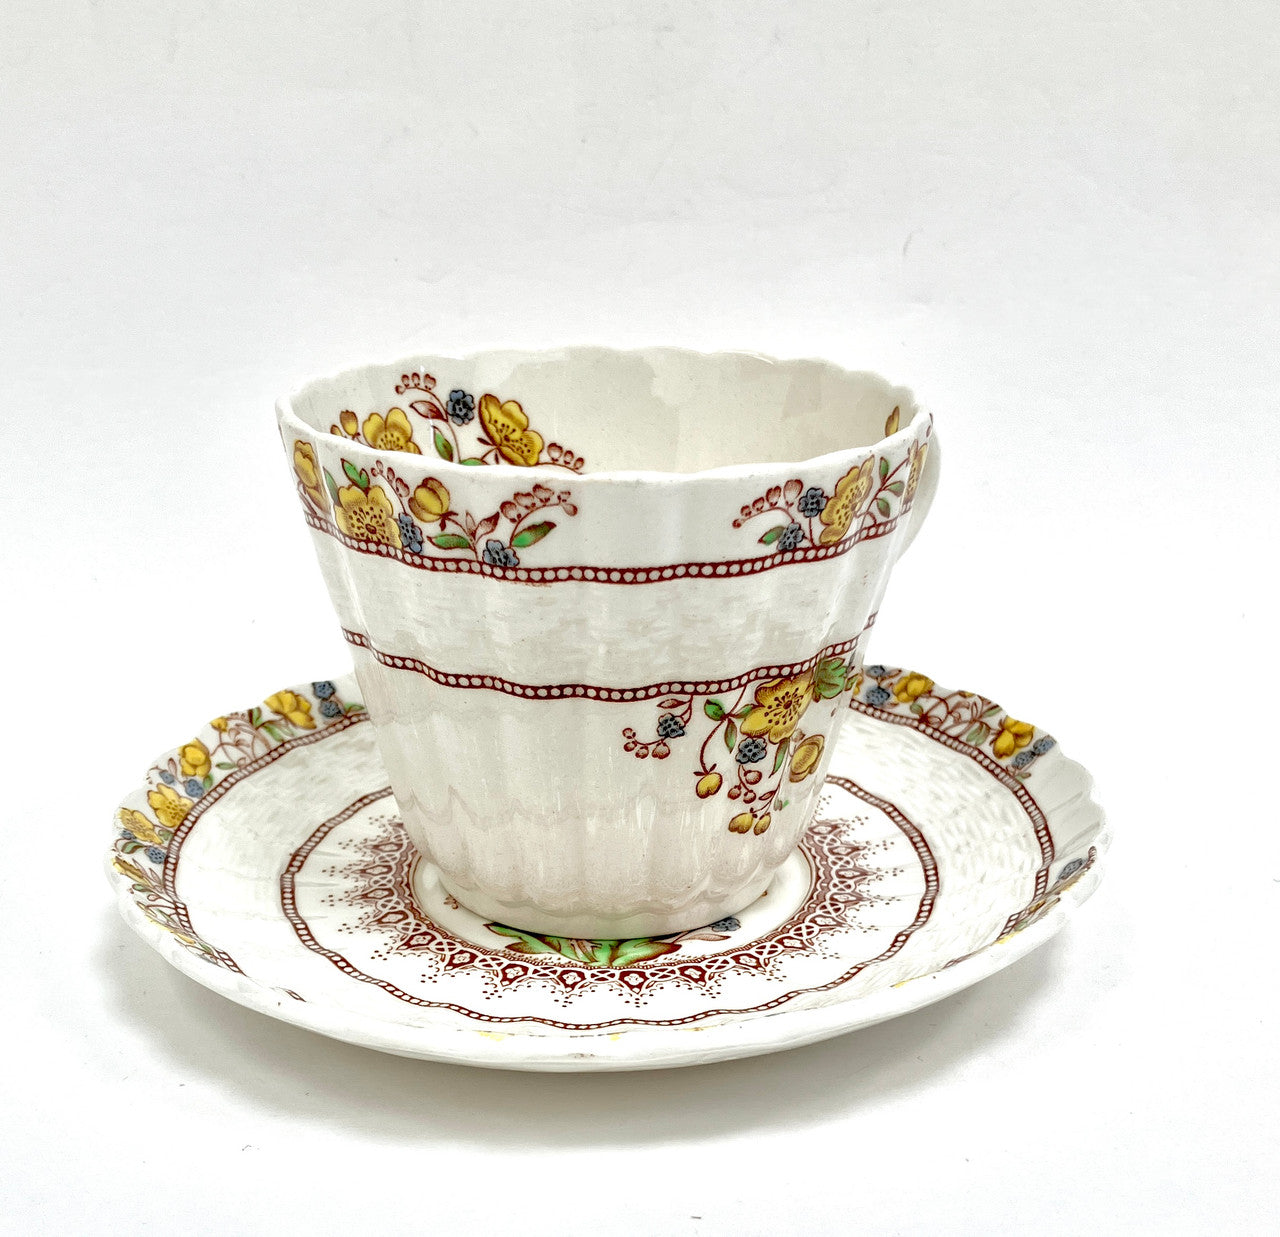 Spode, Copeland, Buttercup, Butter cup, Cup and Saucer, Teacup and Saucer, Tea cup and Saucer, Vintage, Antique